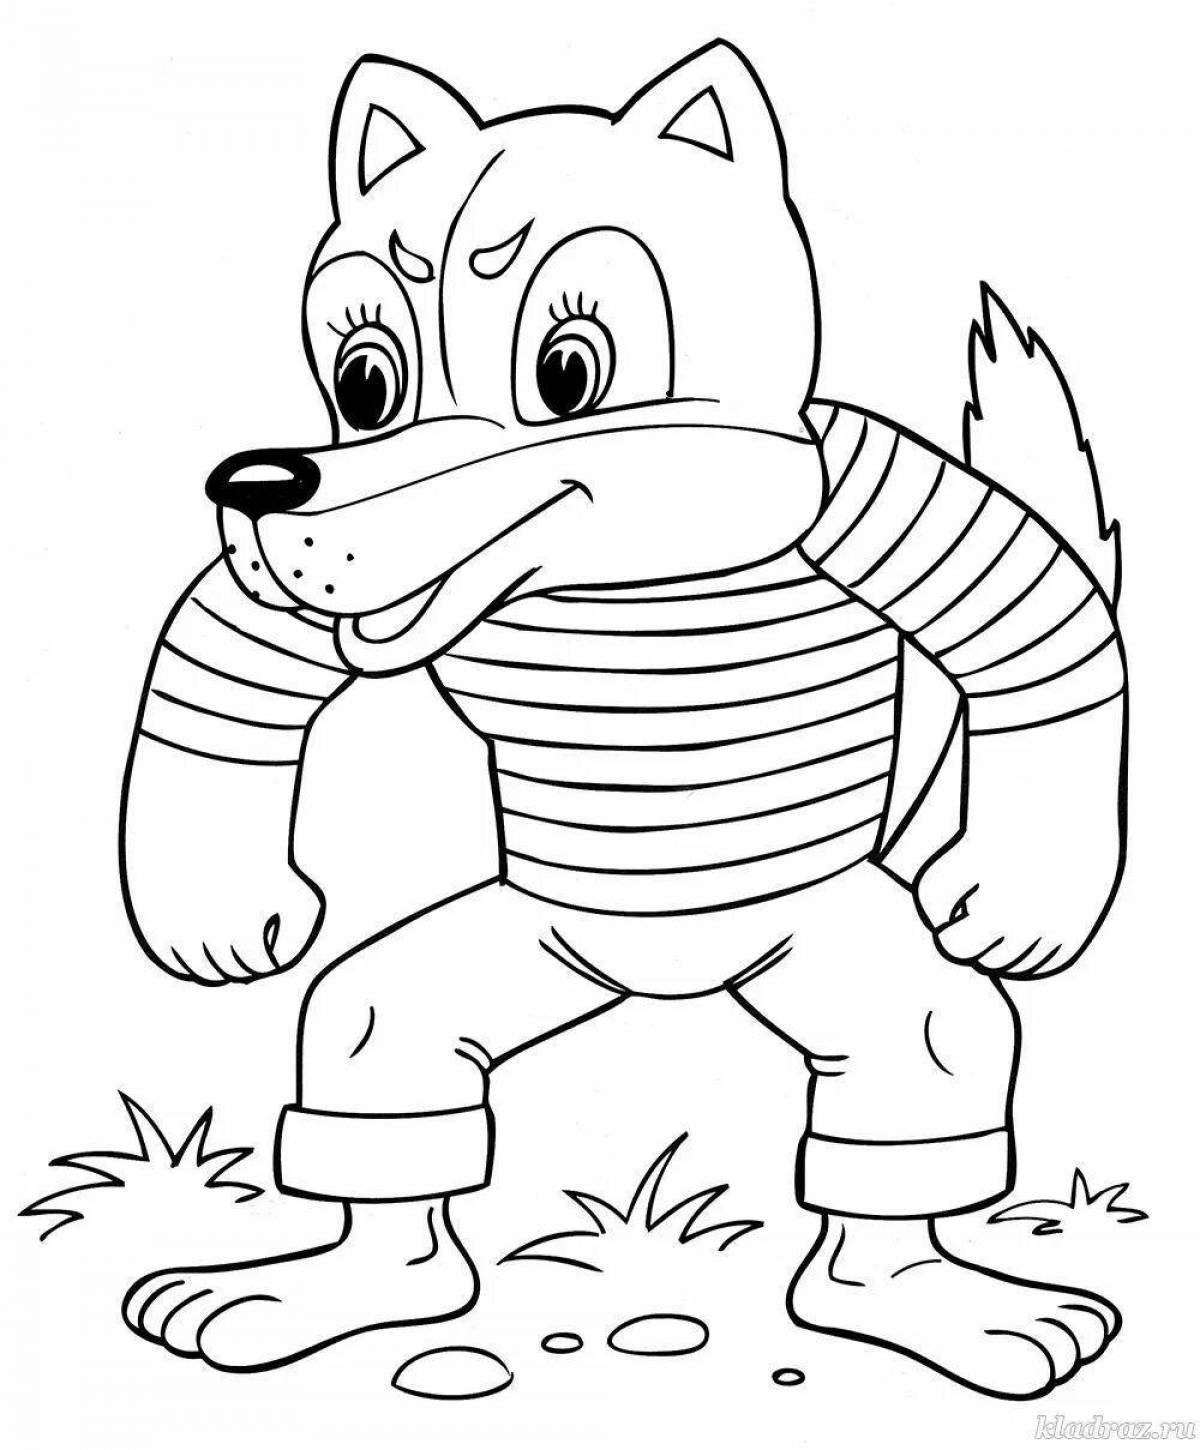 Adorable wolf coloring page